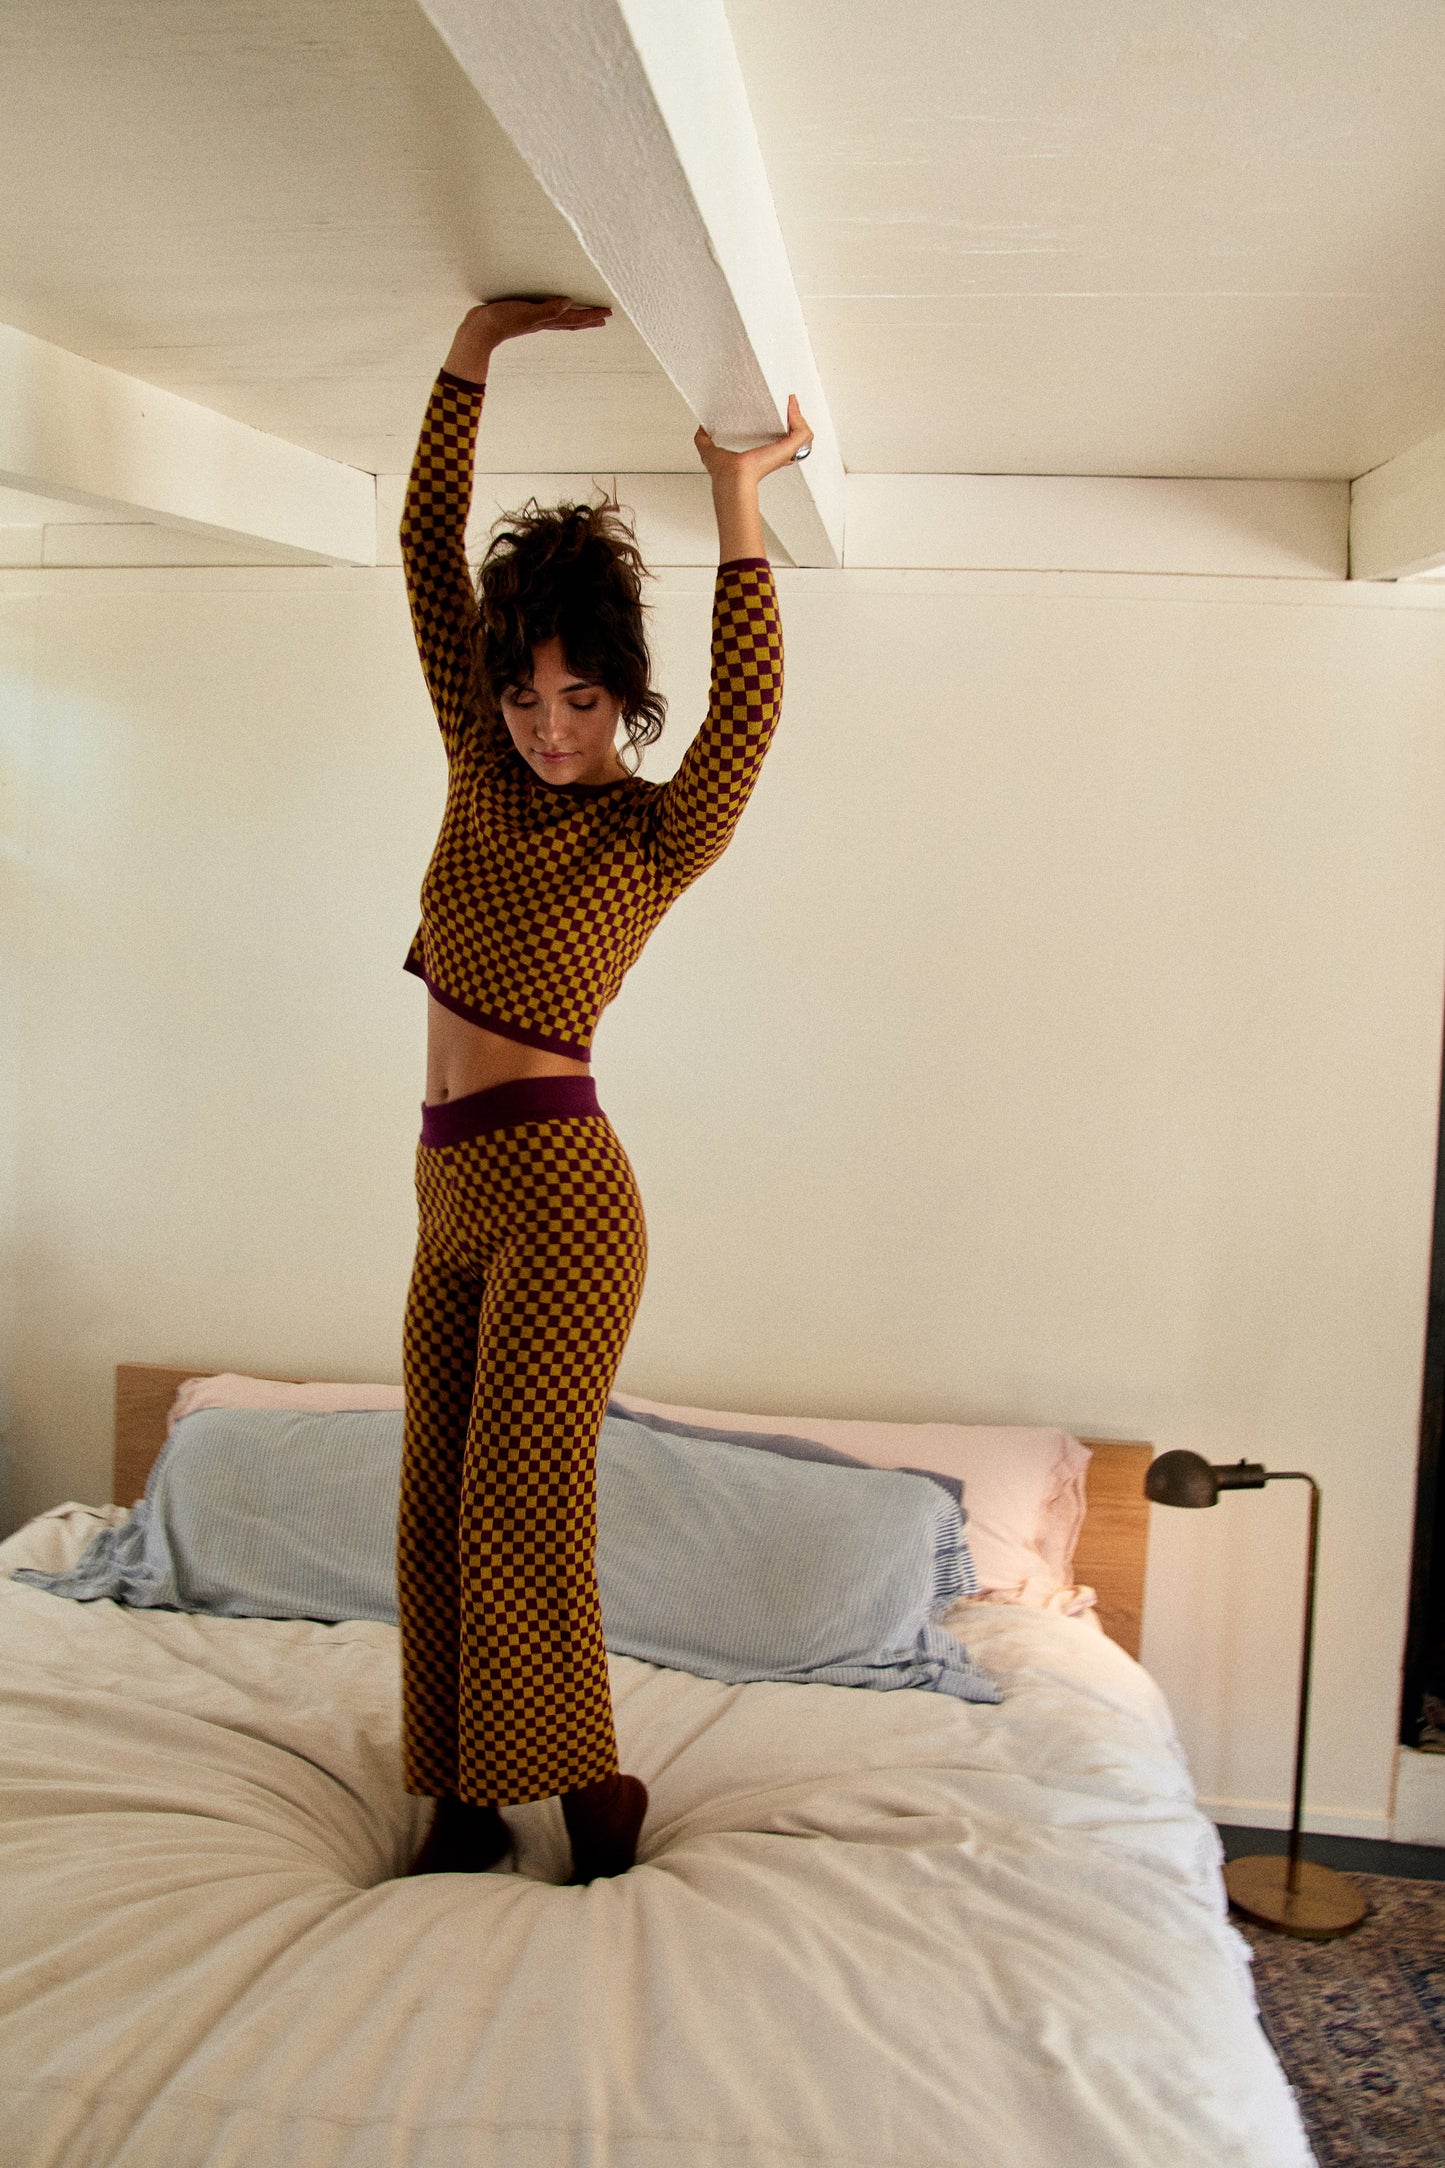 model jumping on bed